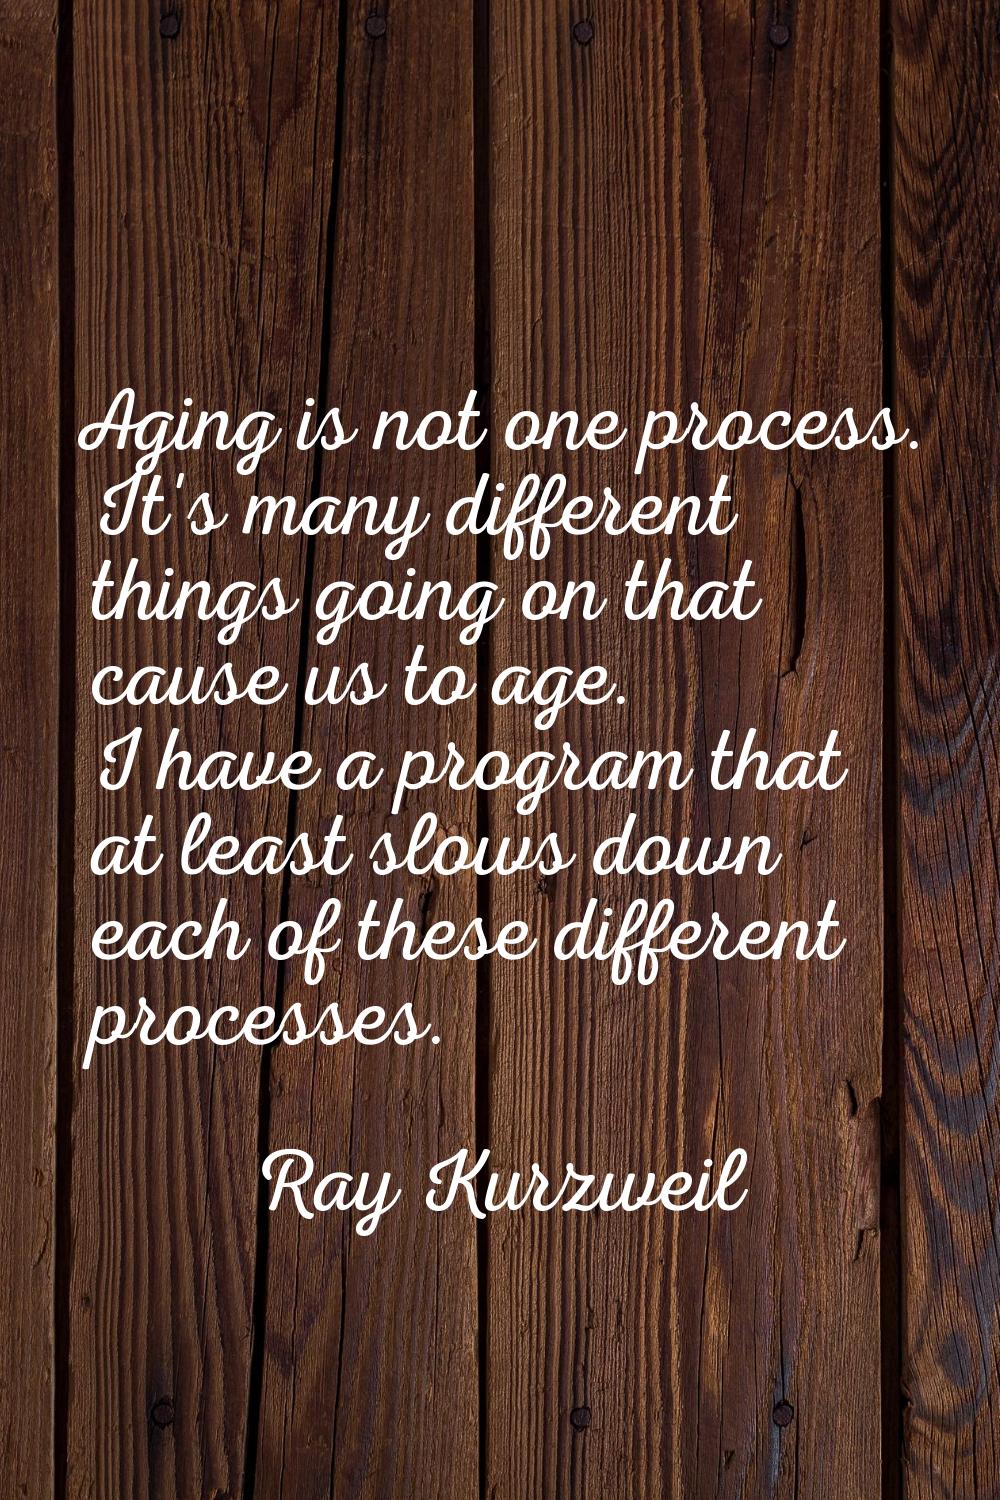 Aging is not one process. It's many different things going on that cause us to age. I have a progra